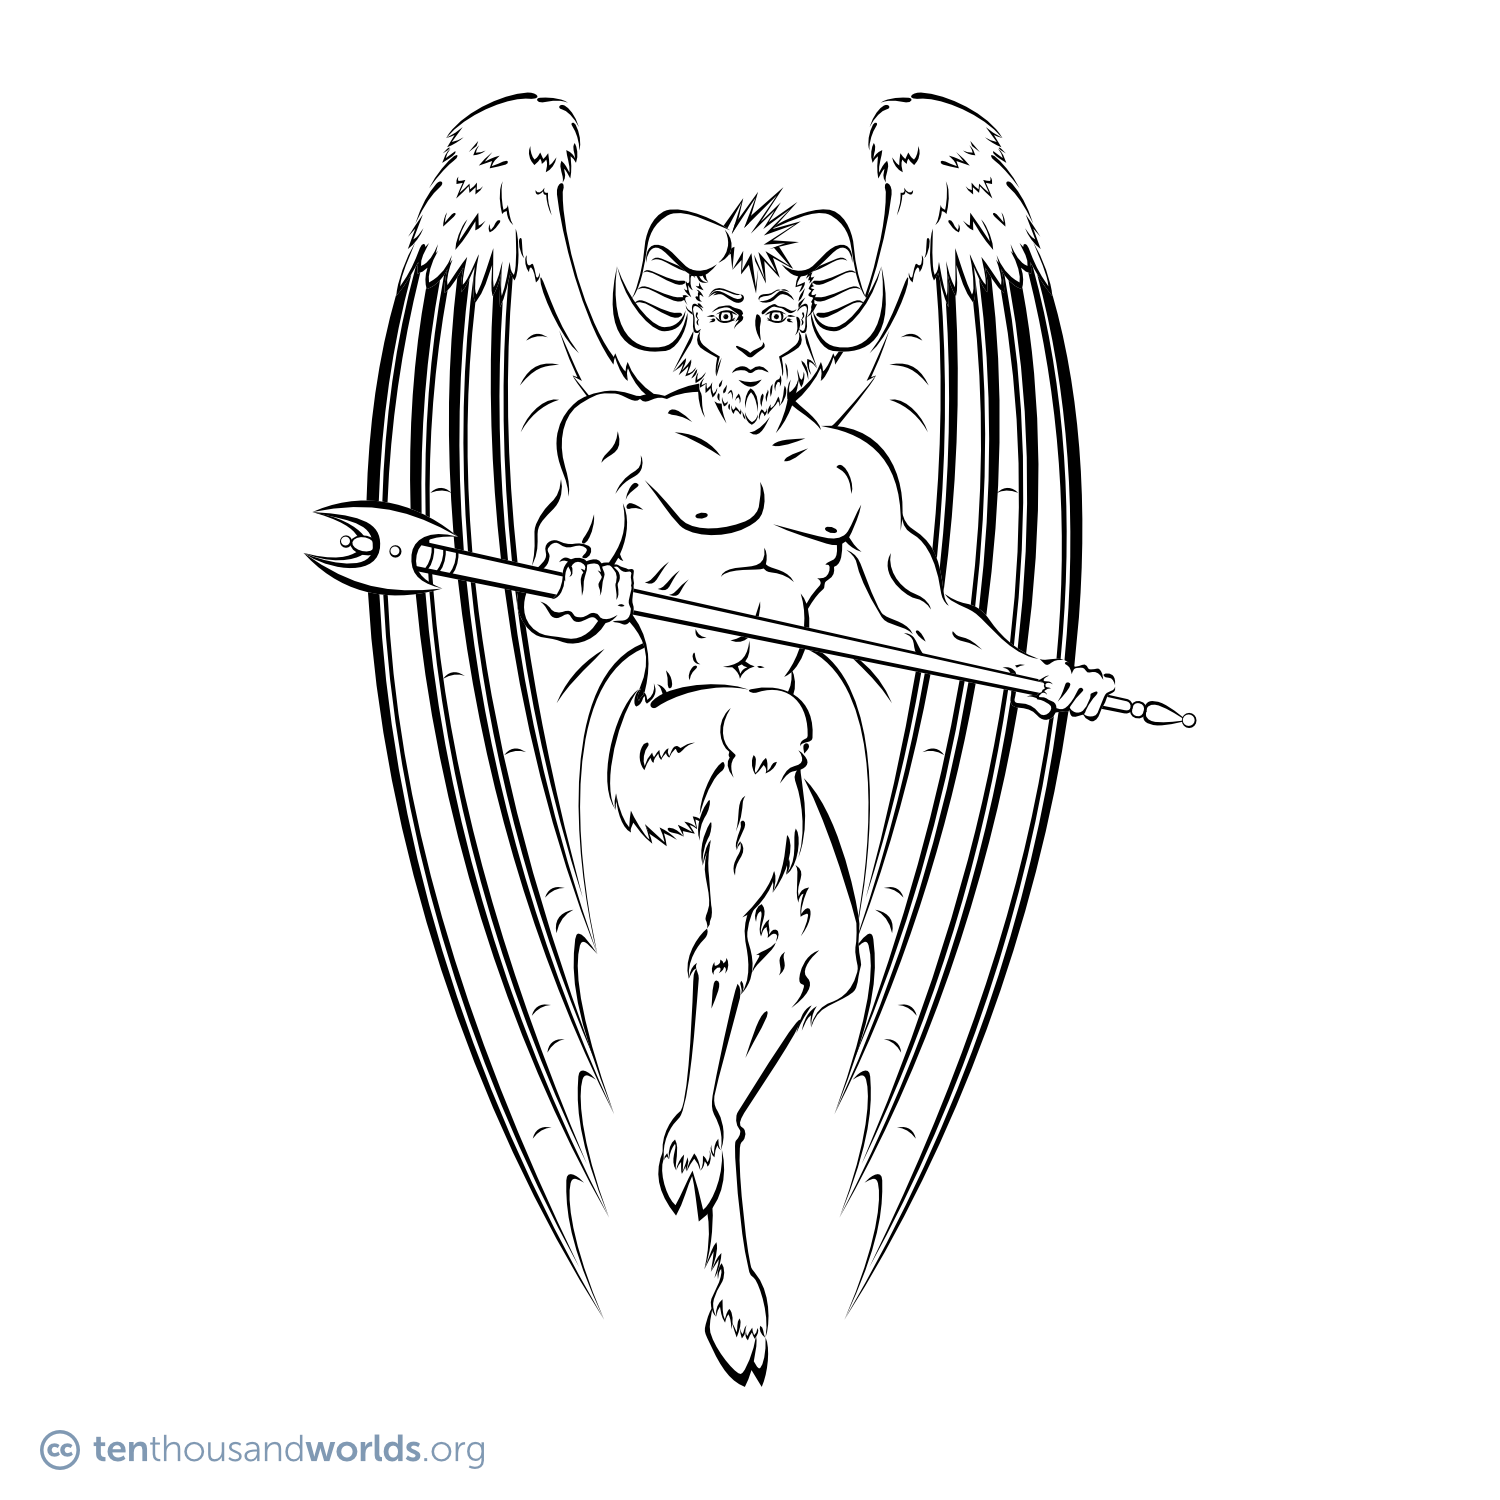 An ink outline of a creature with the upper body and head of a man, ram’s horns, the legs of a goat, and bat-like wings edged in feathers. He grips an elaborate staff.